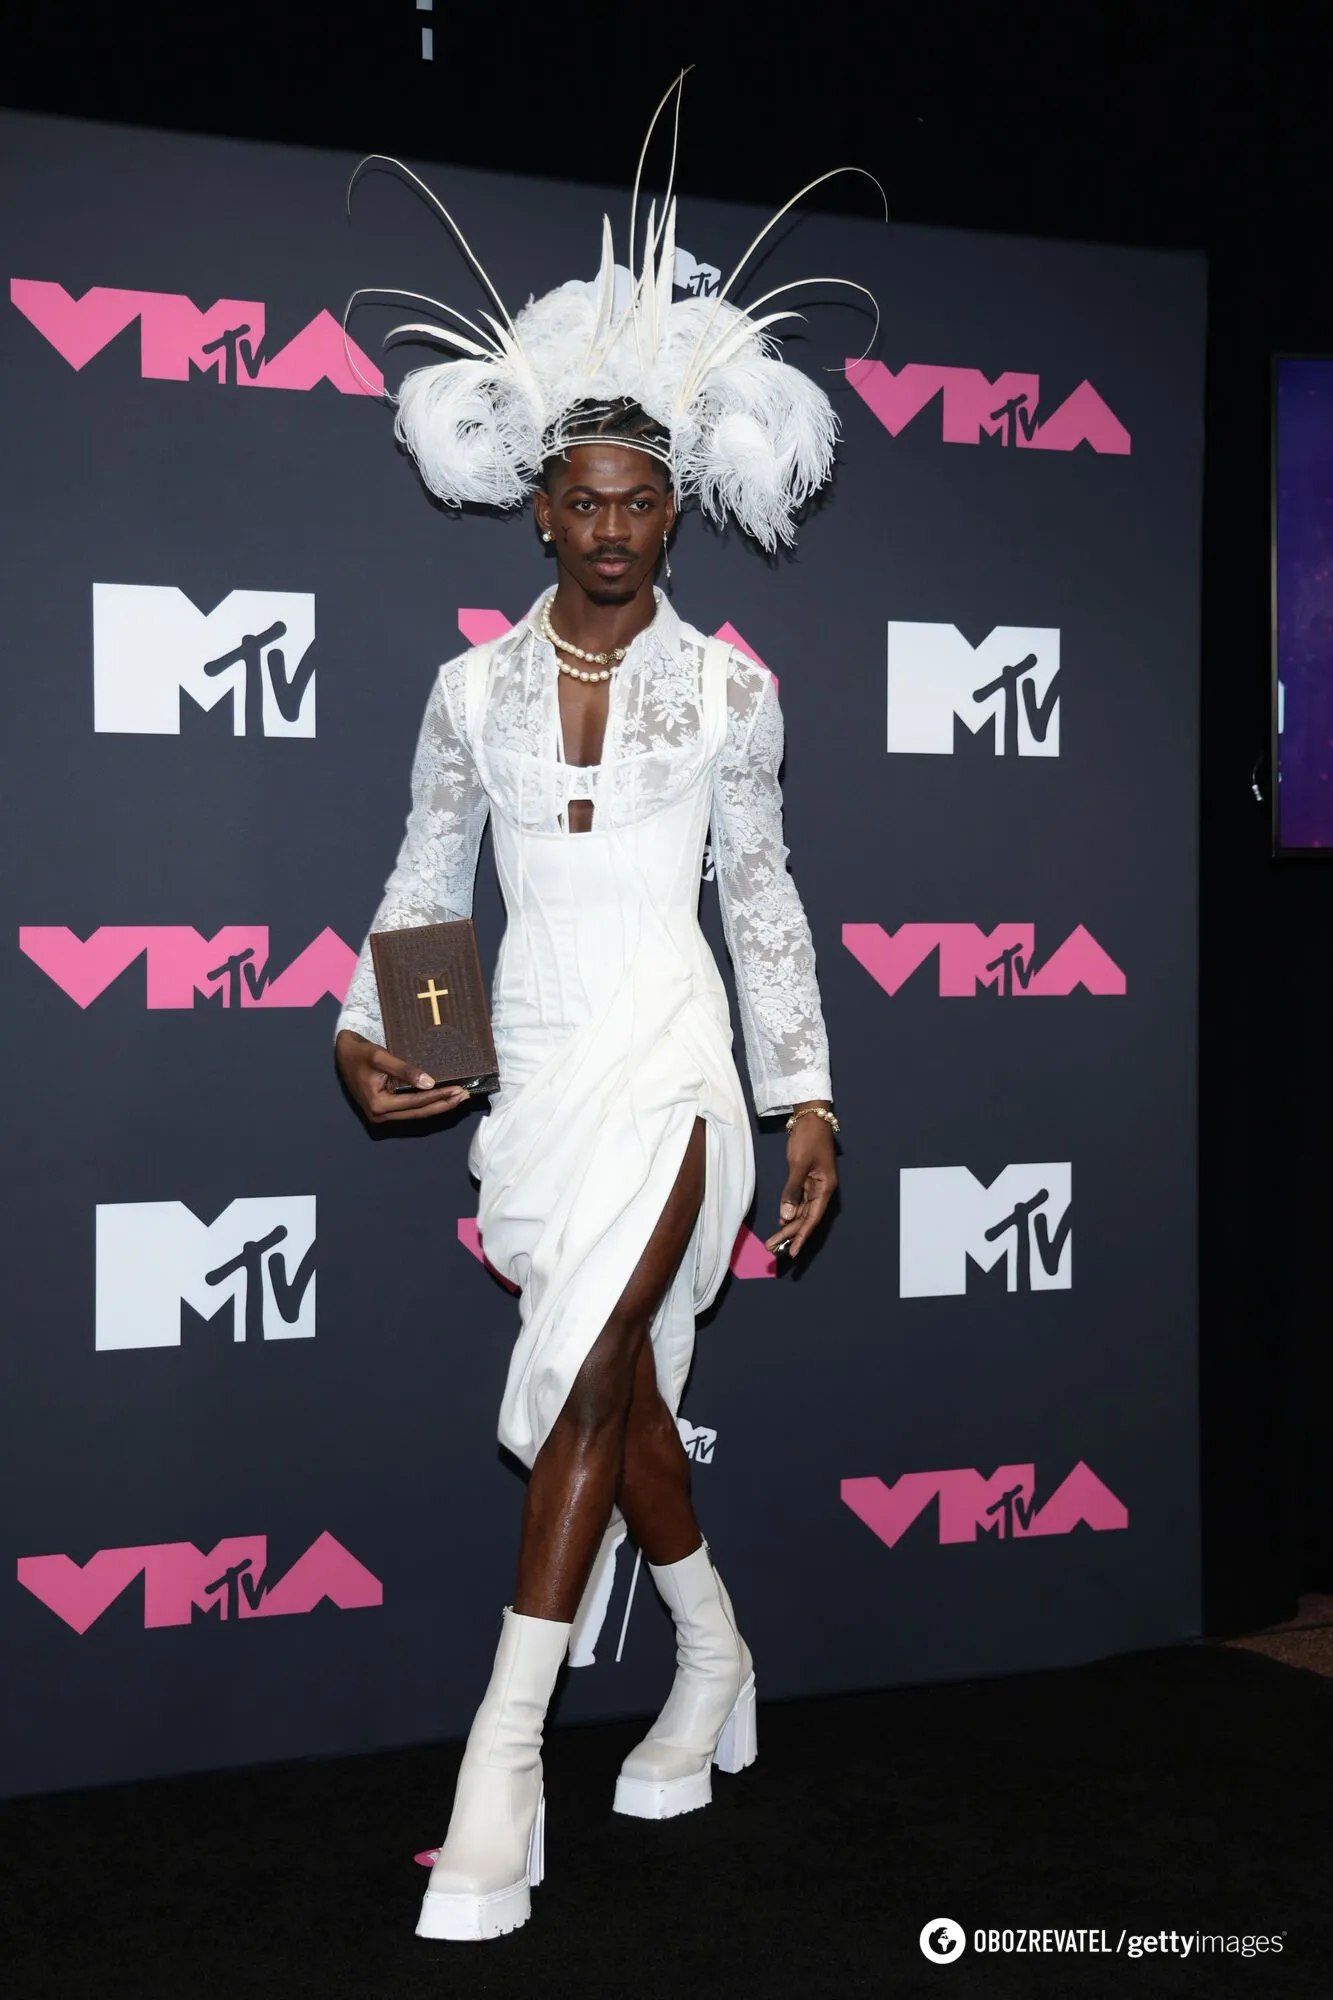 Spider web outfits and translucent dresses: stars struck candid looks on the red carpet of the MTV VMA 2023. Photo